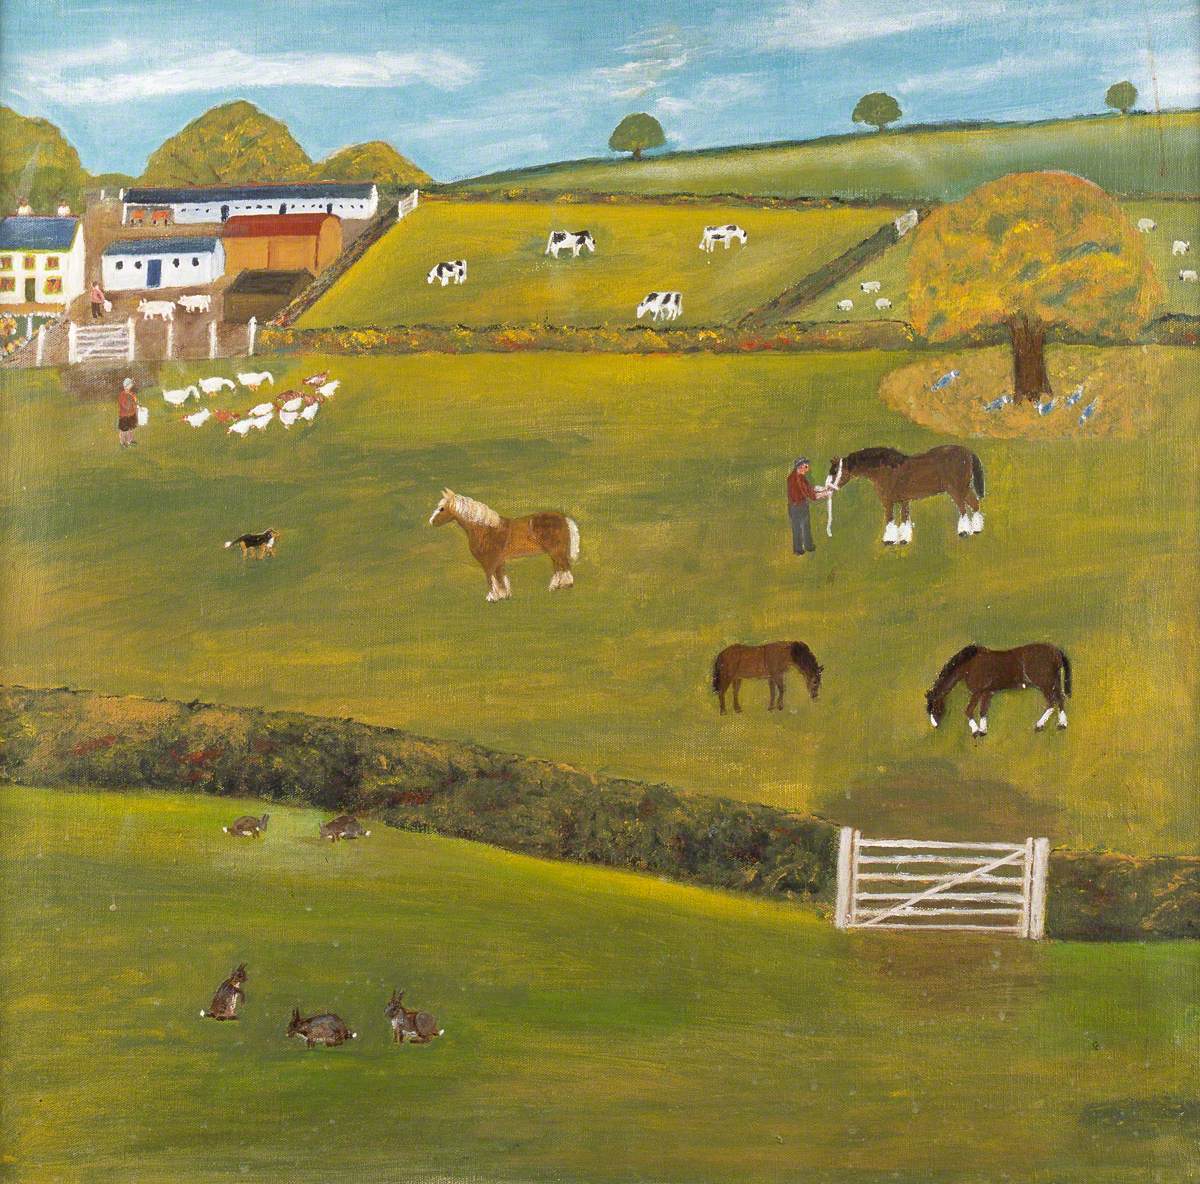 Landscape with Horses, Sheep and Cows